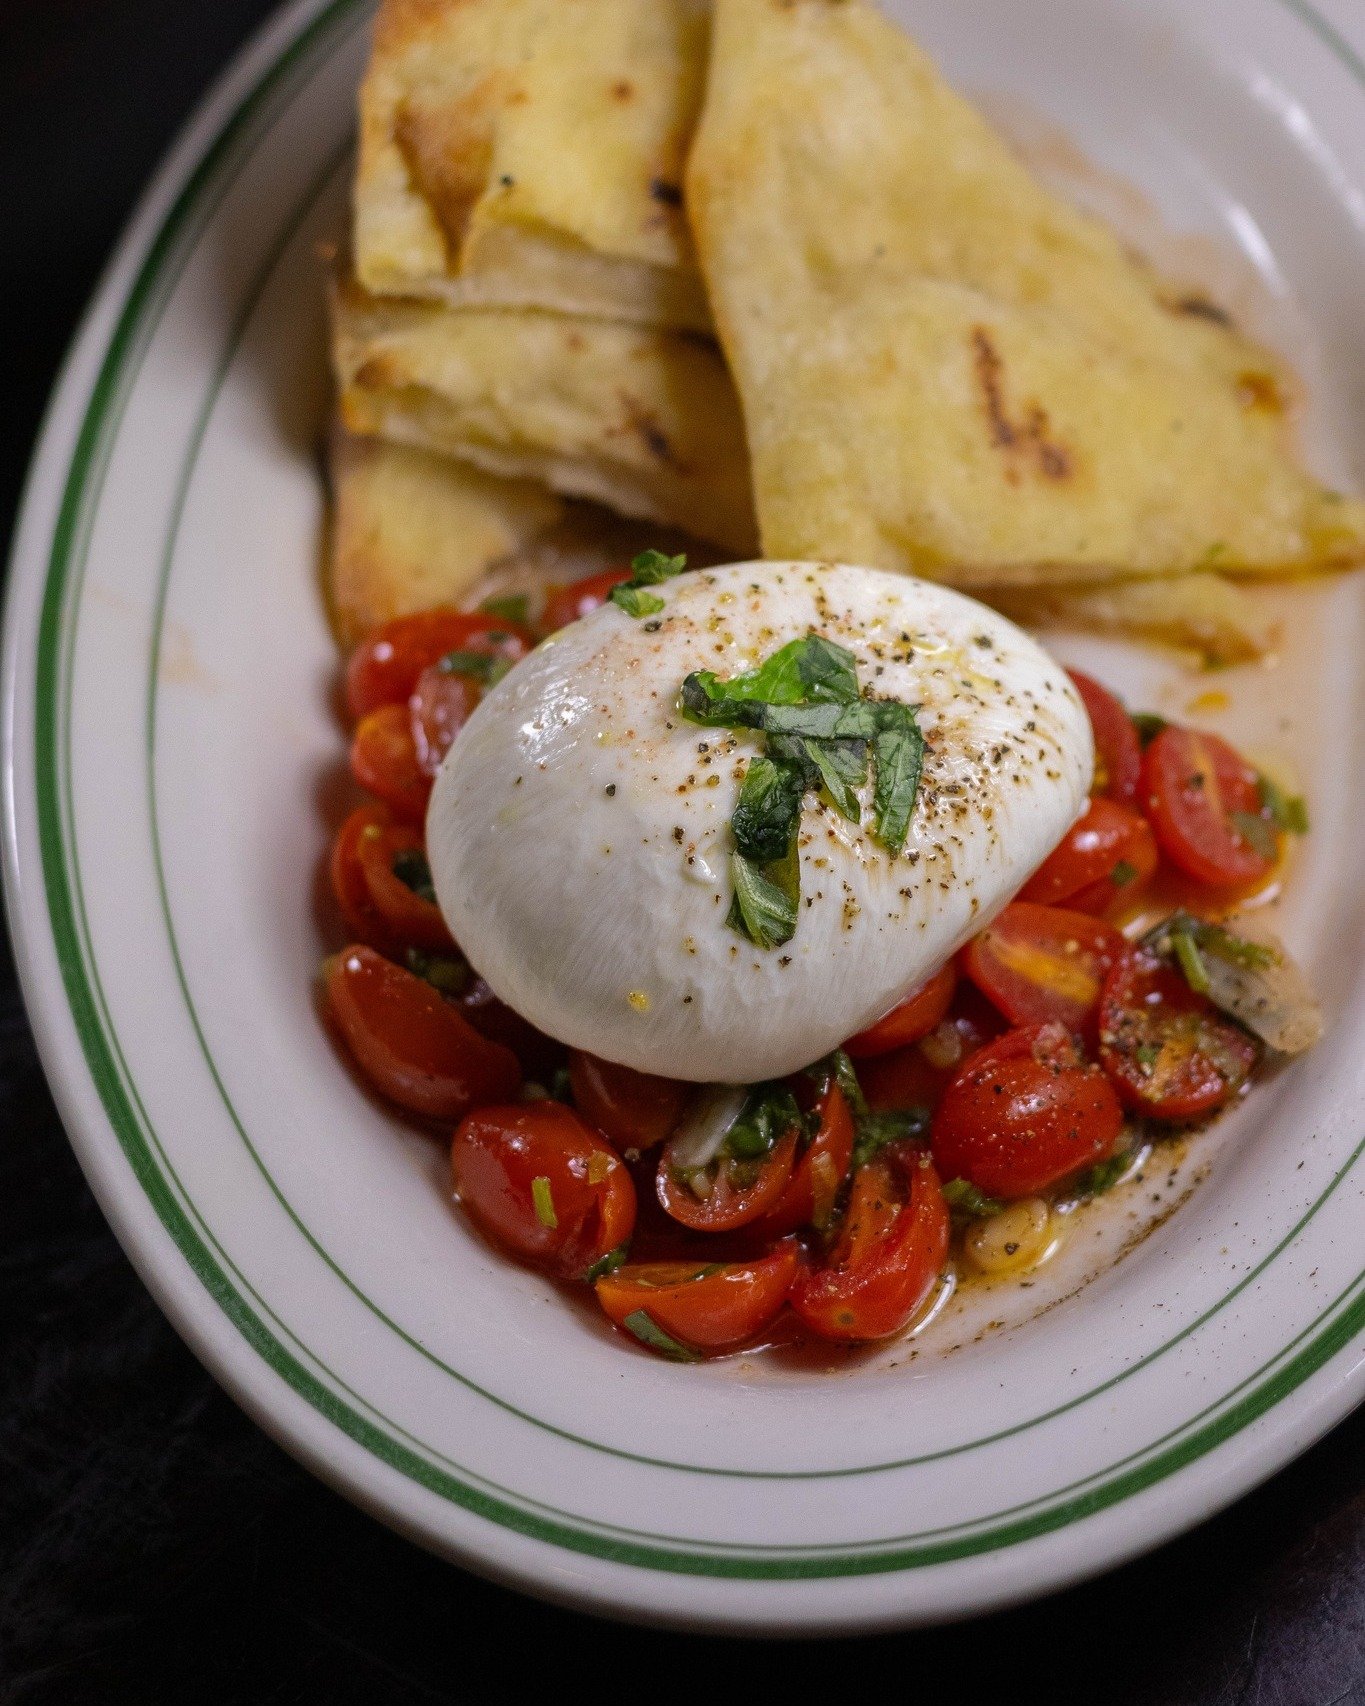 Our new burrata appetizer is a beauty inside &amp; out. Served with marinated tomatoes, basil &amp; grilled bread, cut it open to reveal a creamy, rich center 🍅🥖🧀